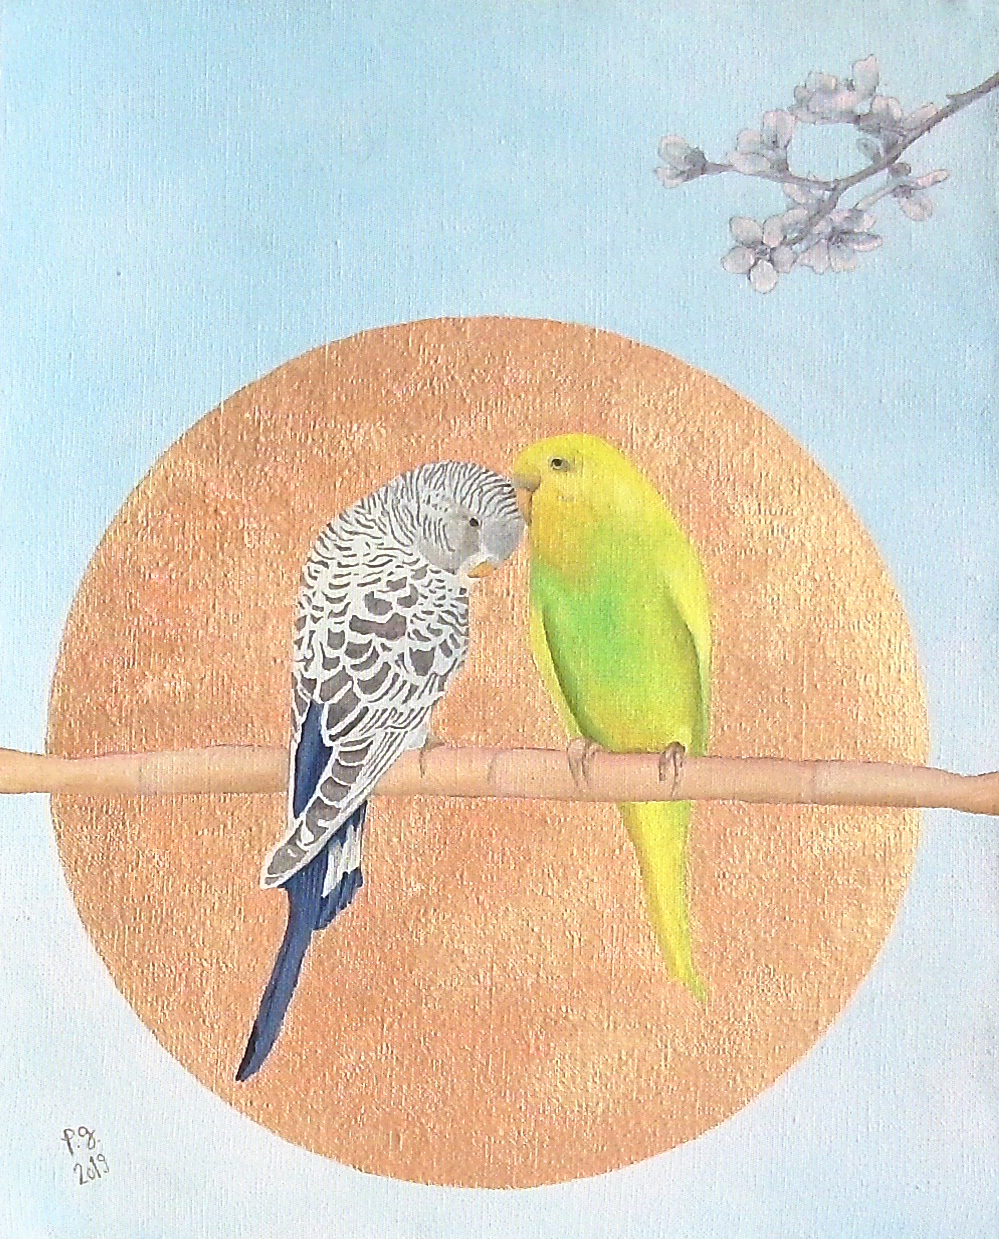 patrick gourgouillat - “Parakeets And Almond Blossoms or The Next Spring [Animals]” - 2019